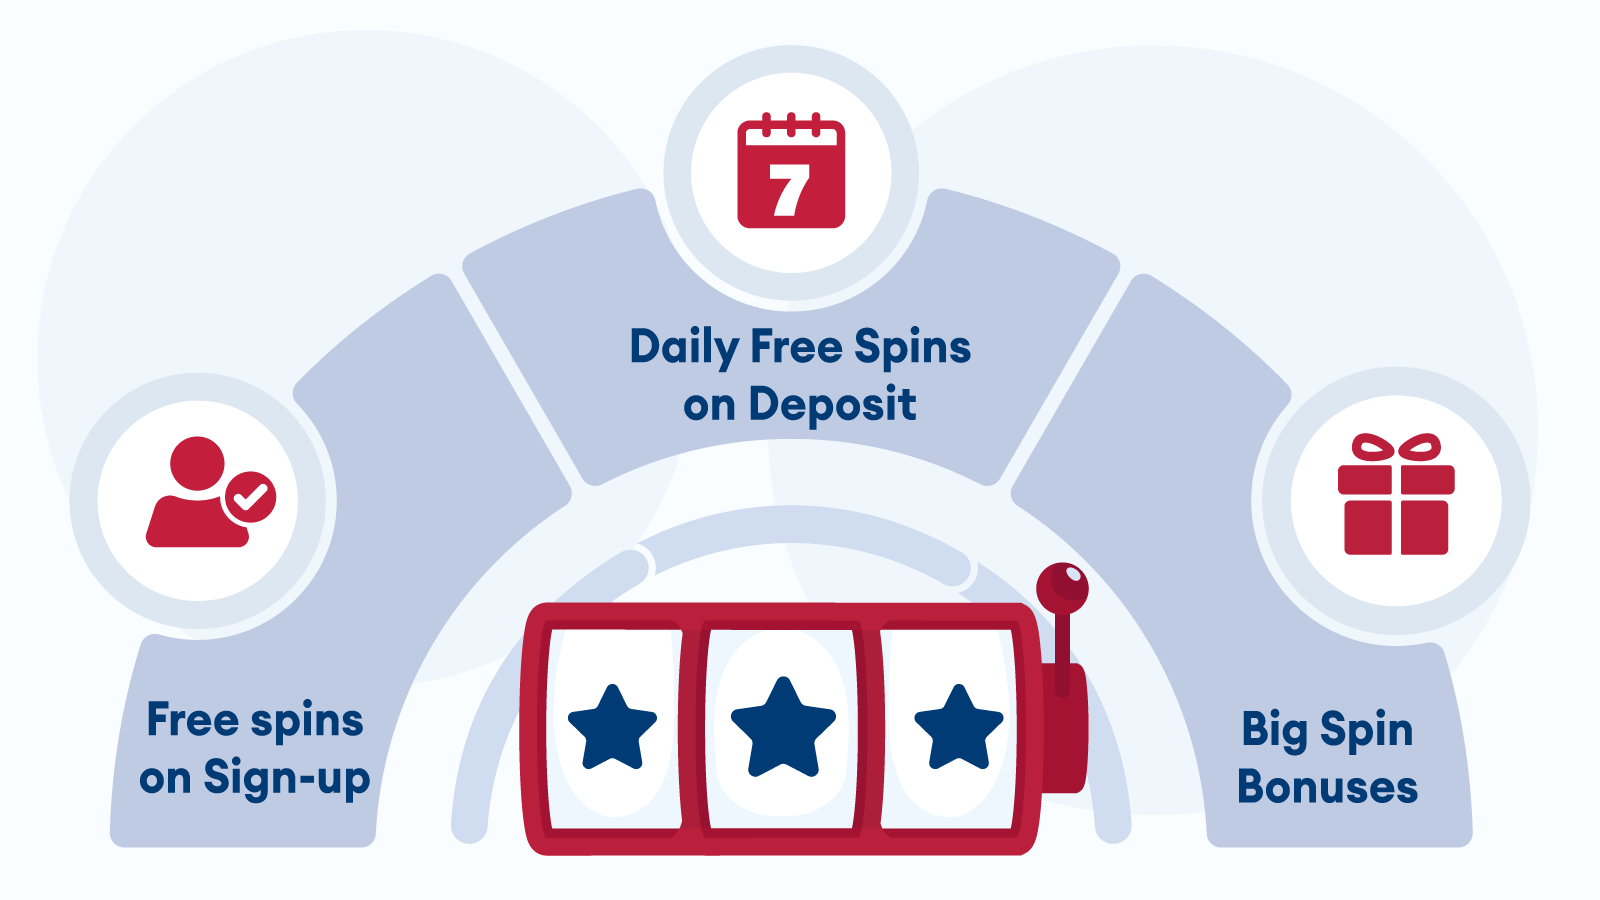 Discover the Best Alternatives for Real Money: Free Spins On Deposit